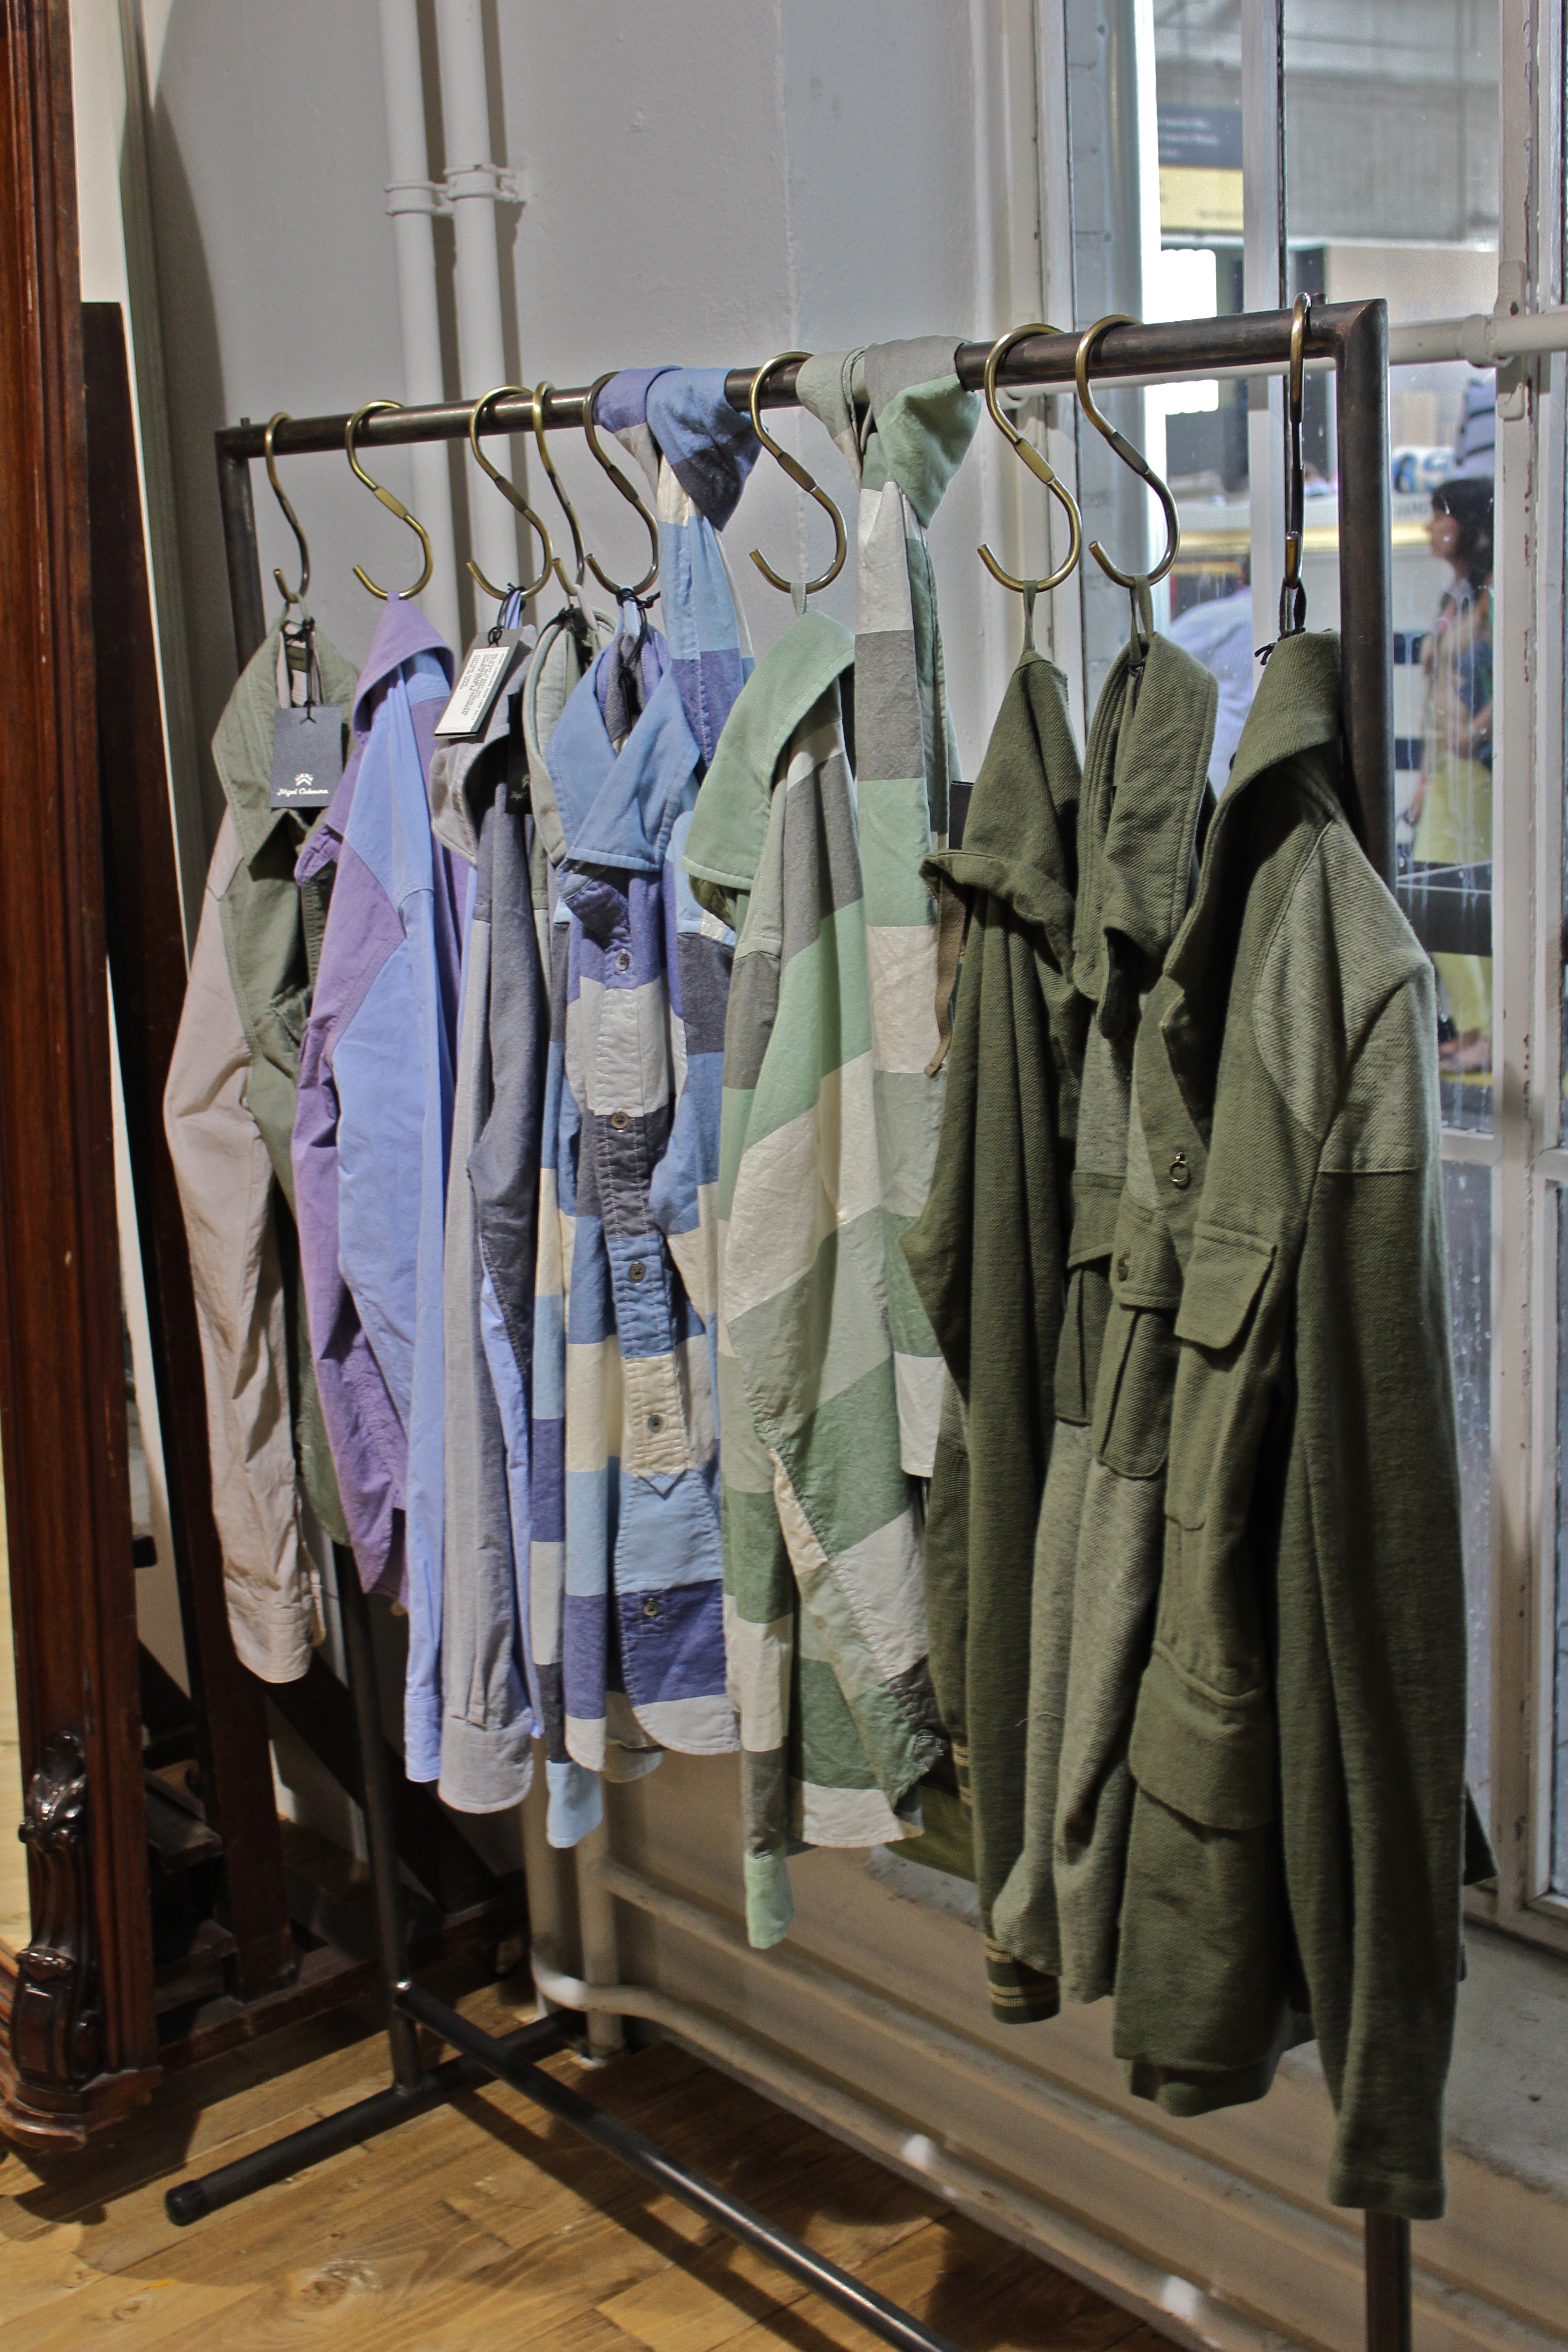 Brand Profile: Nigel Cabourn - Rope Dye Crafted Goods